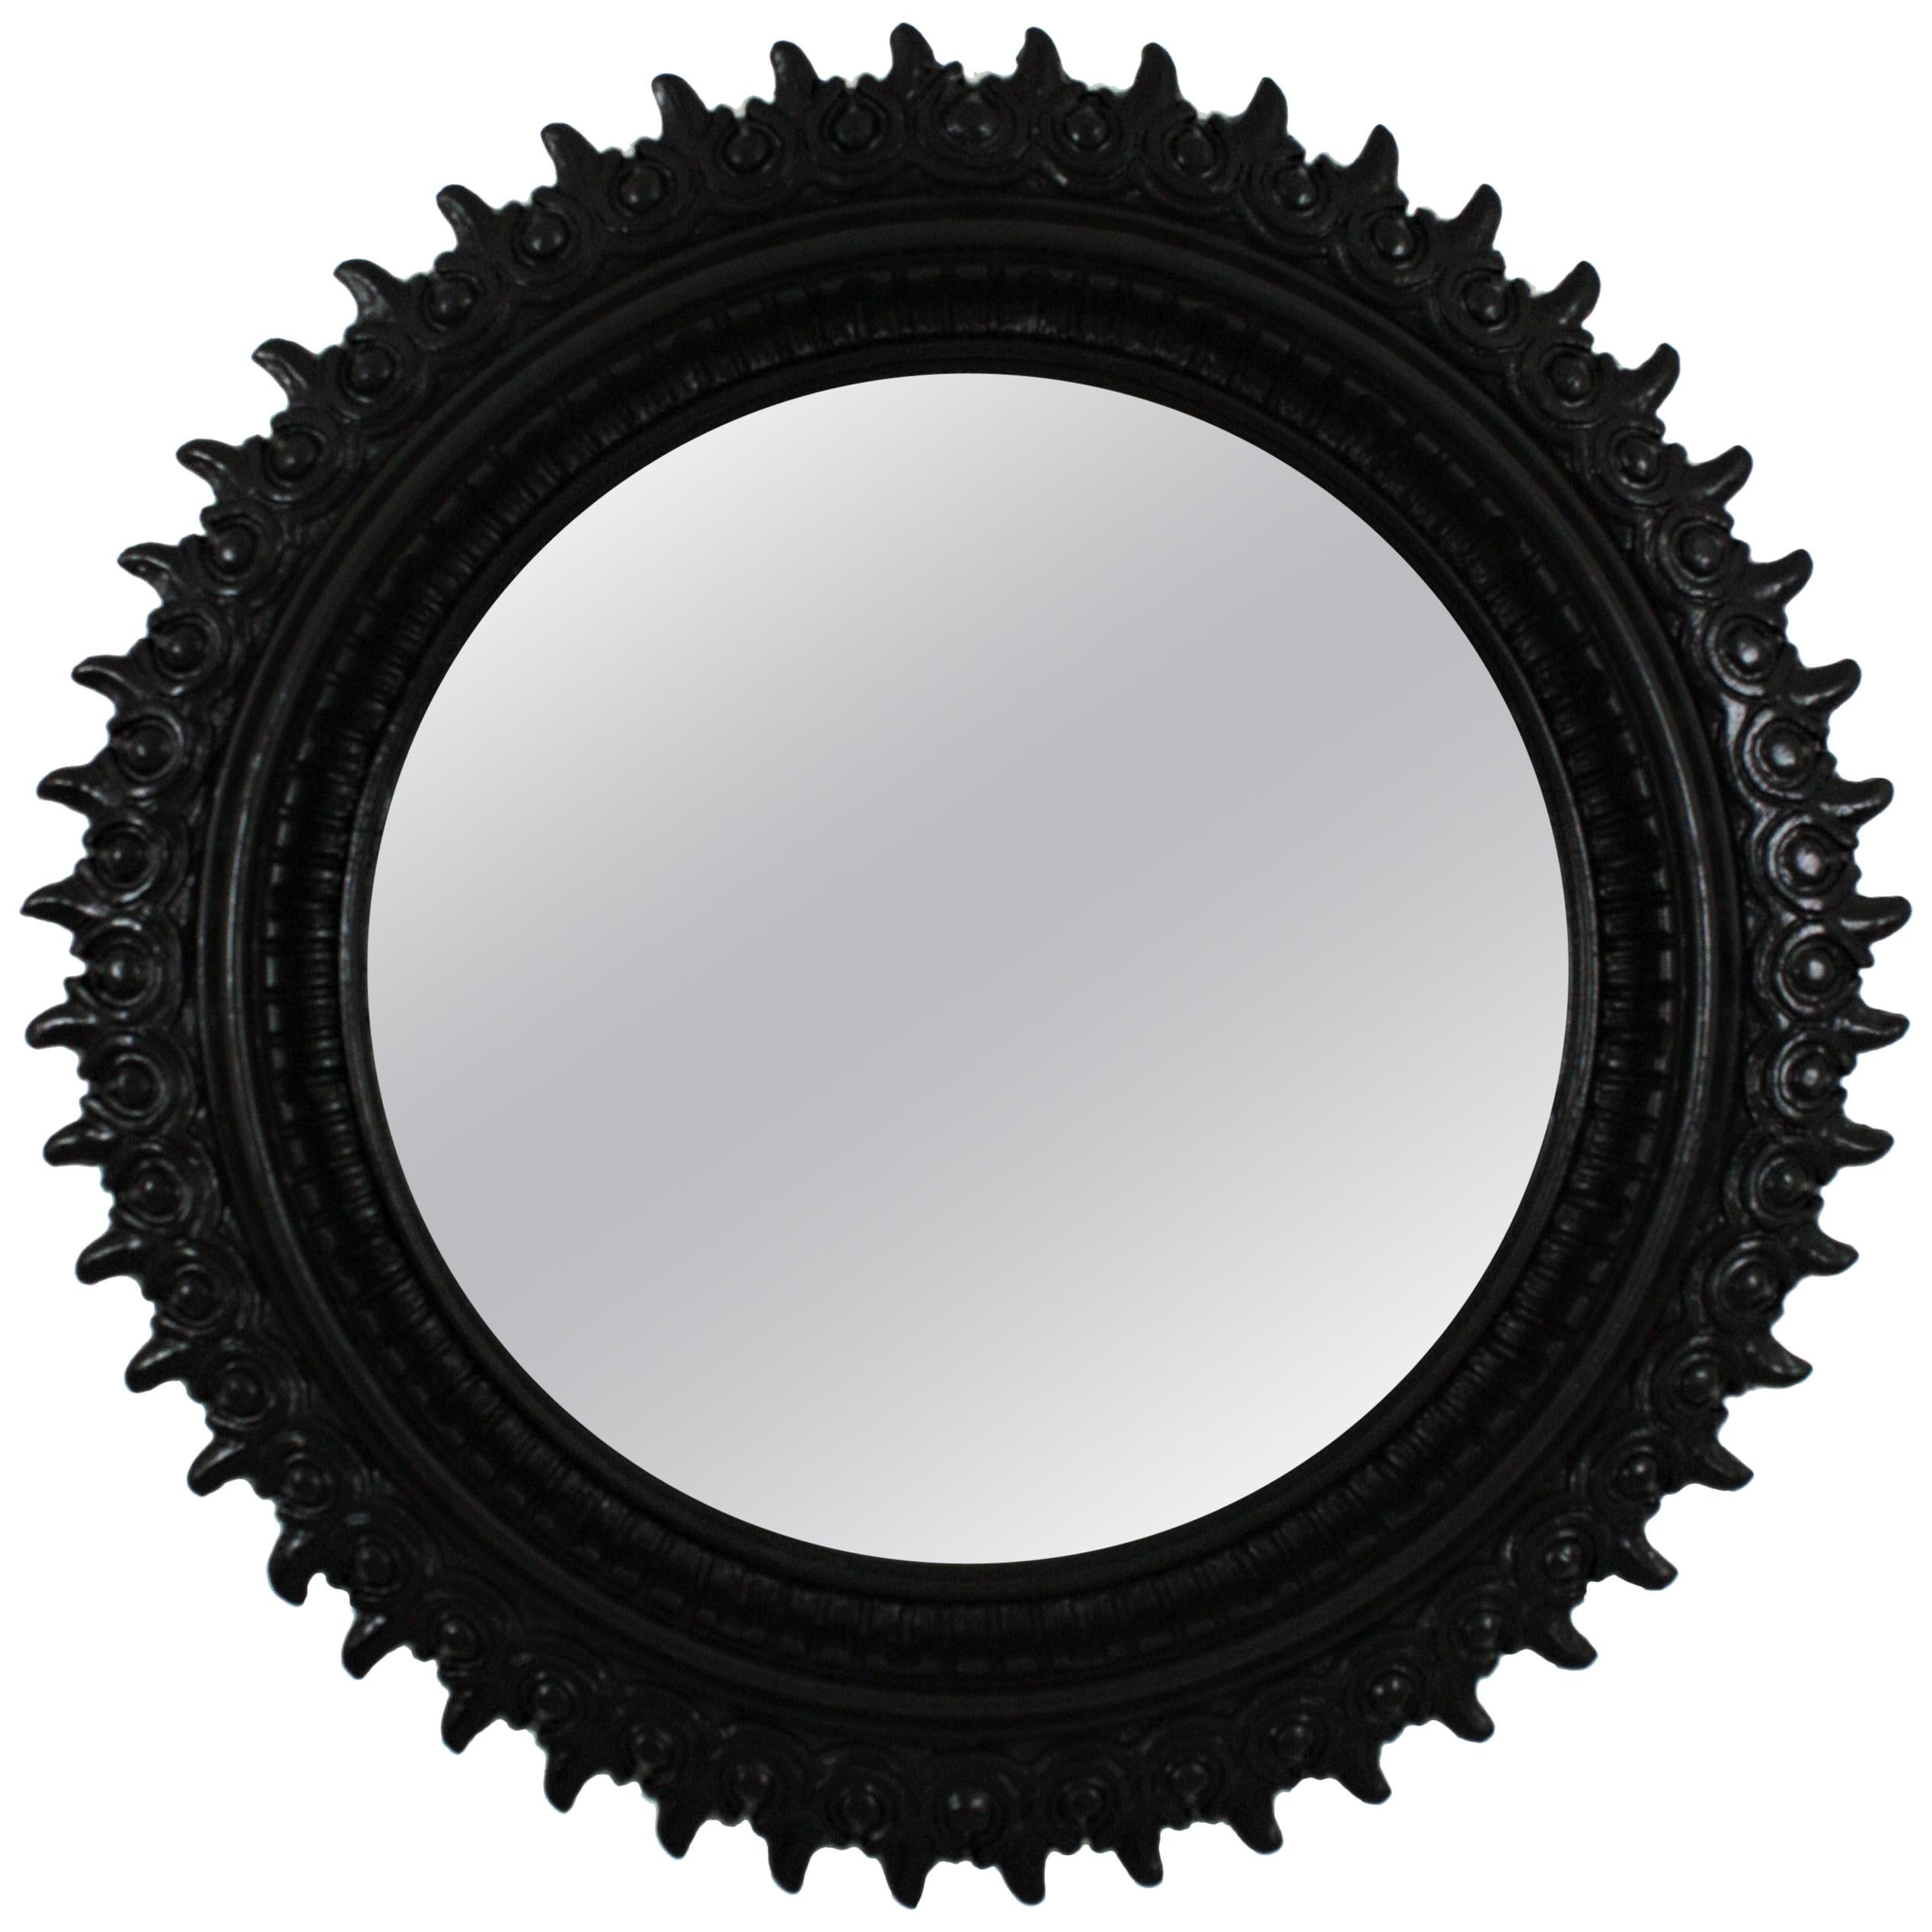 Sunburst Mirror in Carved Wood and Black Patina by Francisco Hurtado For Sale